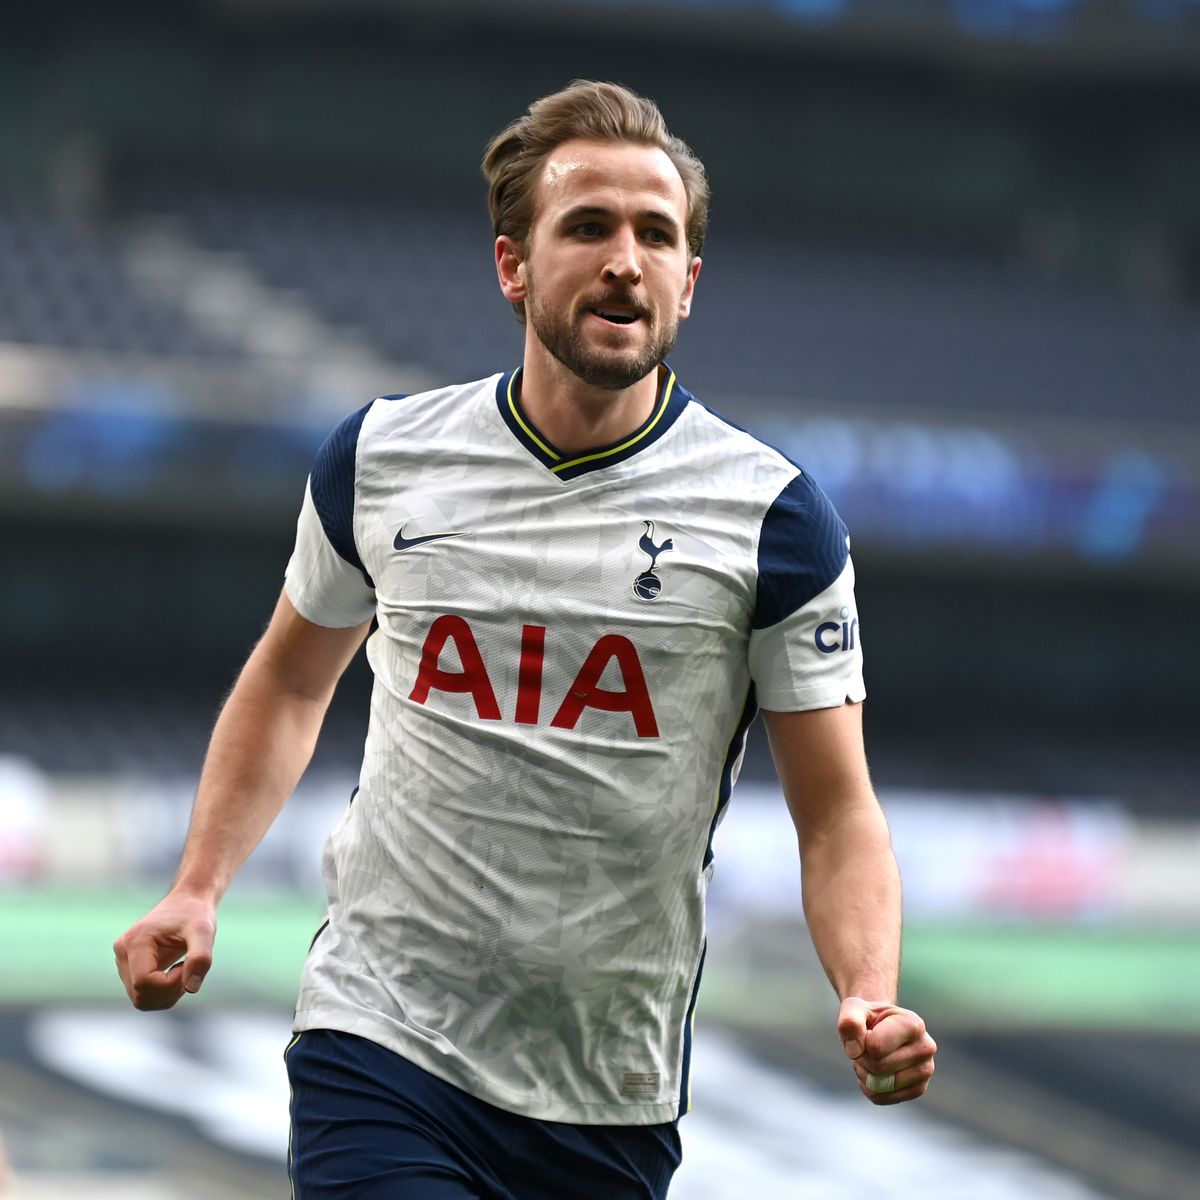 Tottenham Are Ambitious To Keep Kane -King